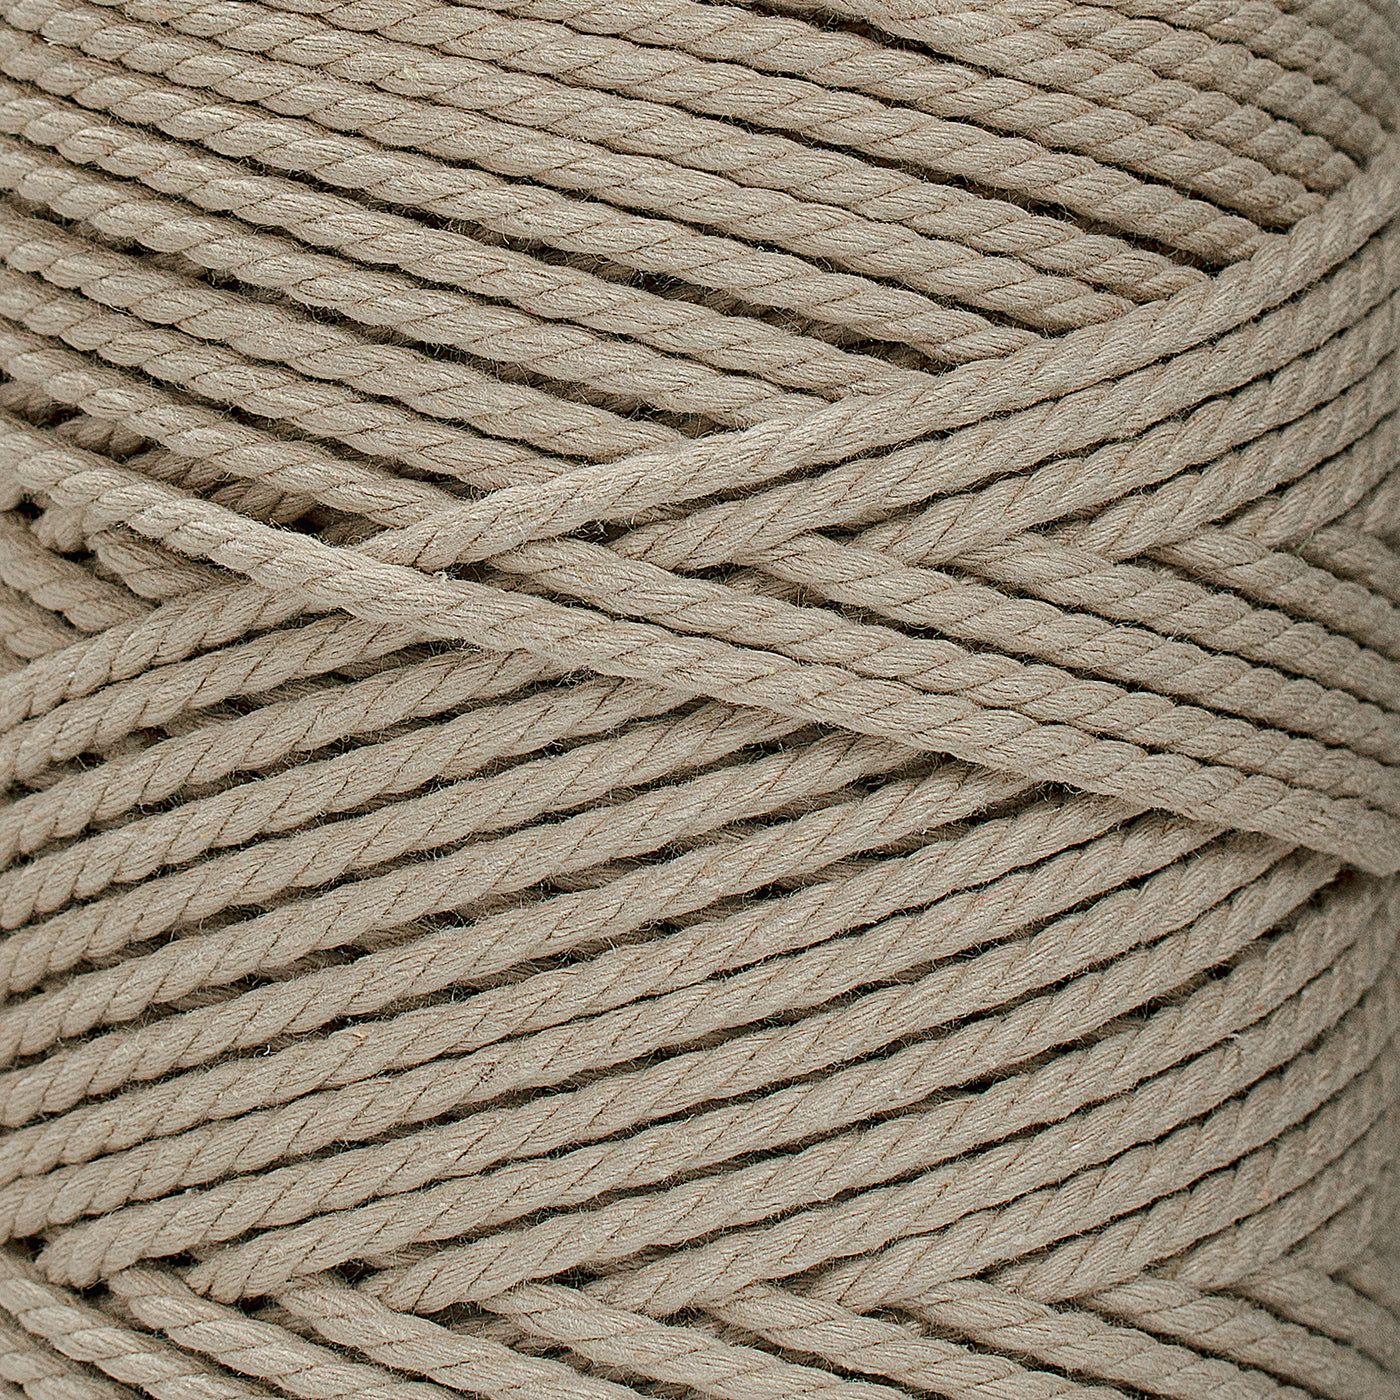 COTTON ROPE ZERO WASTE 3 MM - 3 PLY - BEIGE COLOR